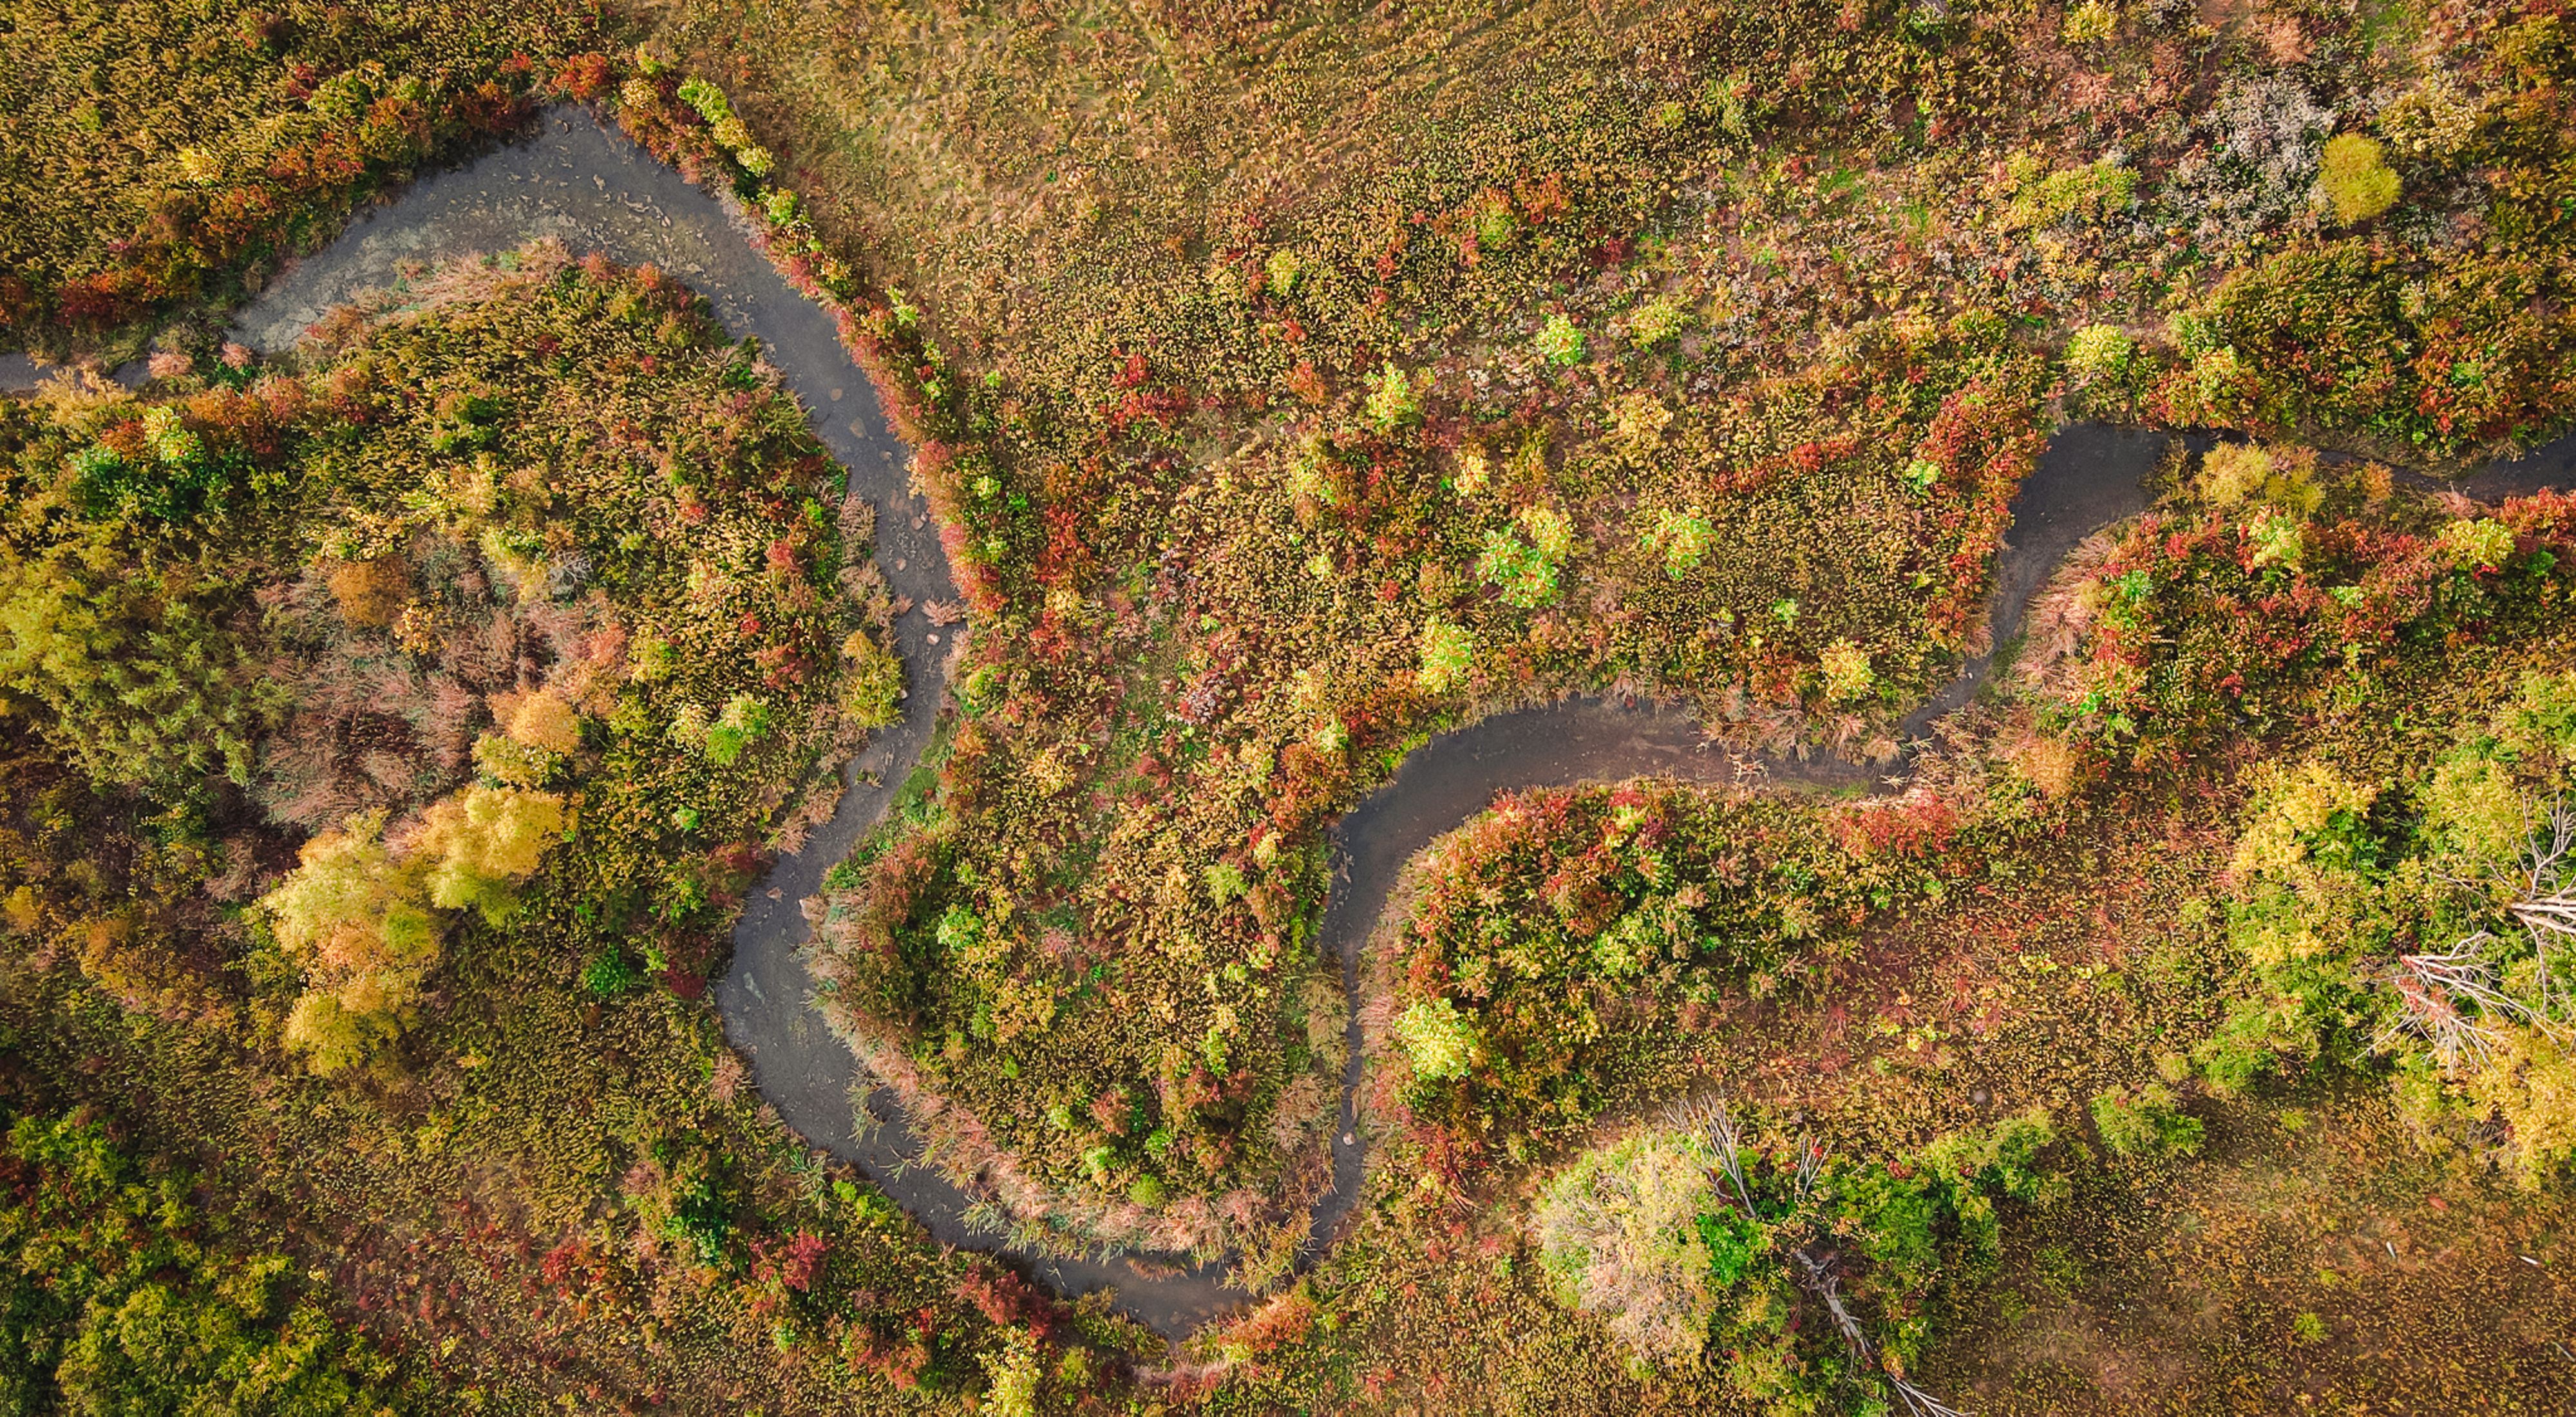 Aerial view of Big Darby Headwaters Creek winding through colorful landscape of fall trees.